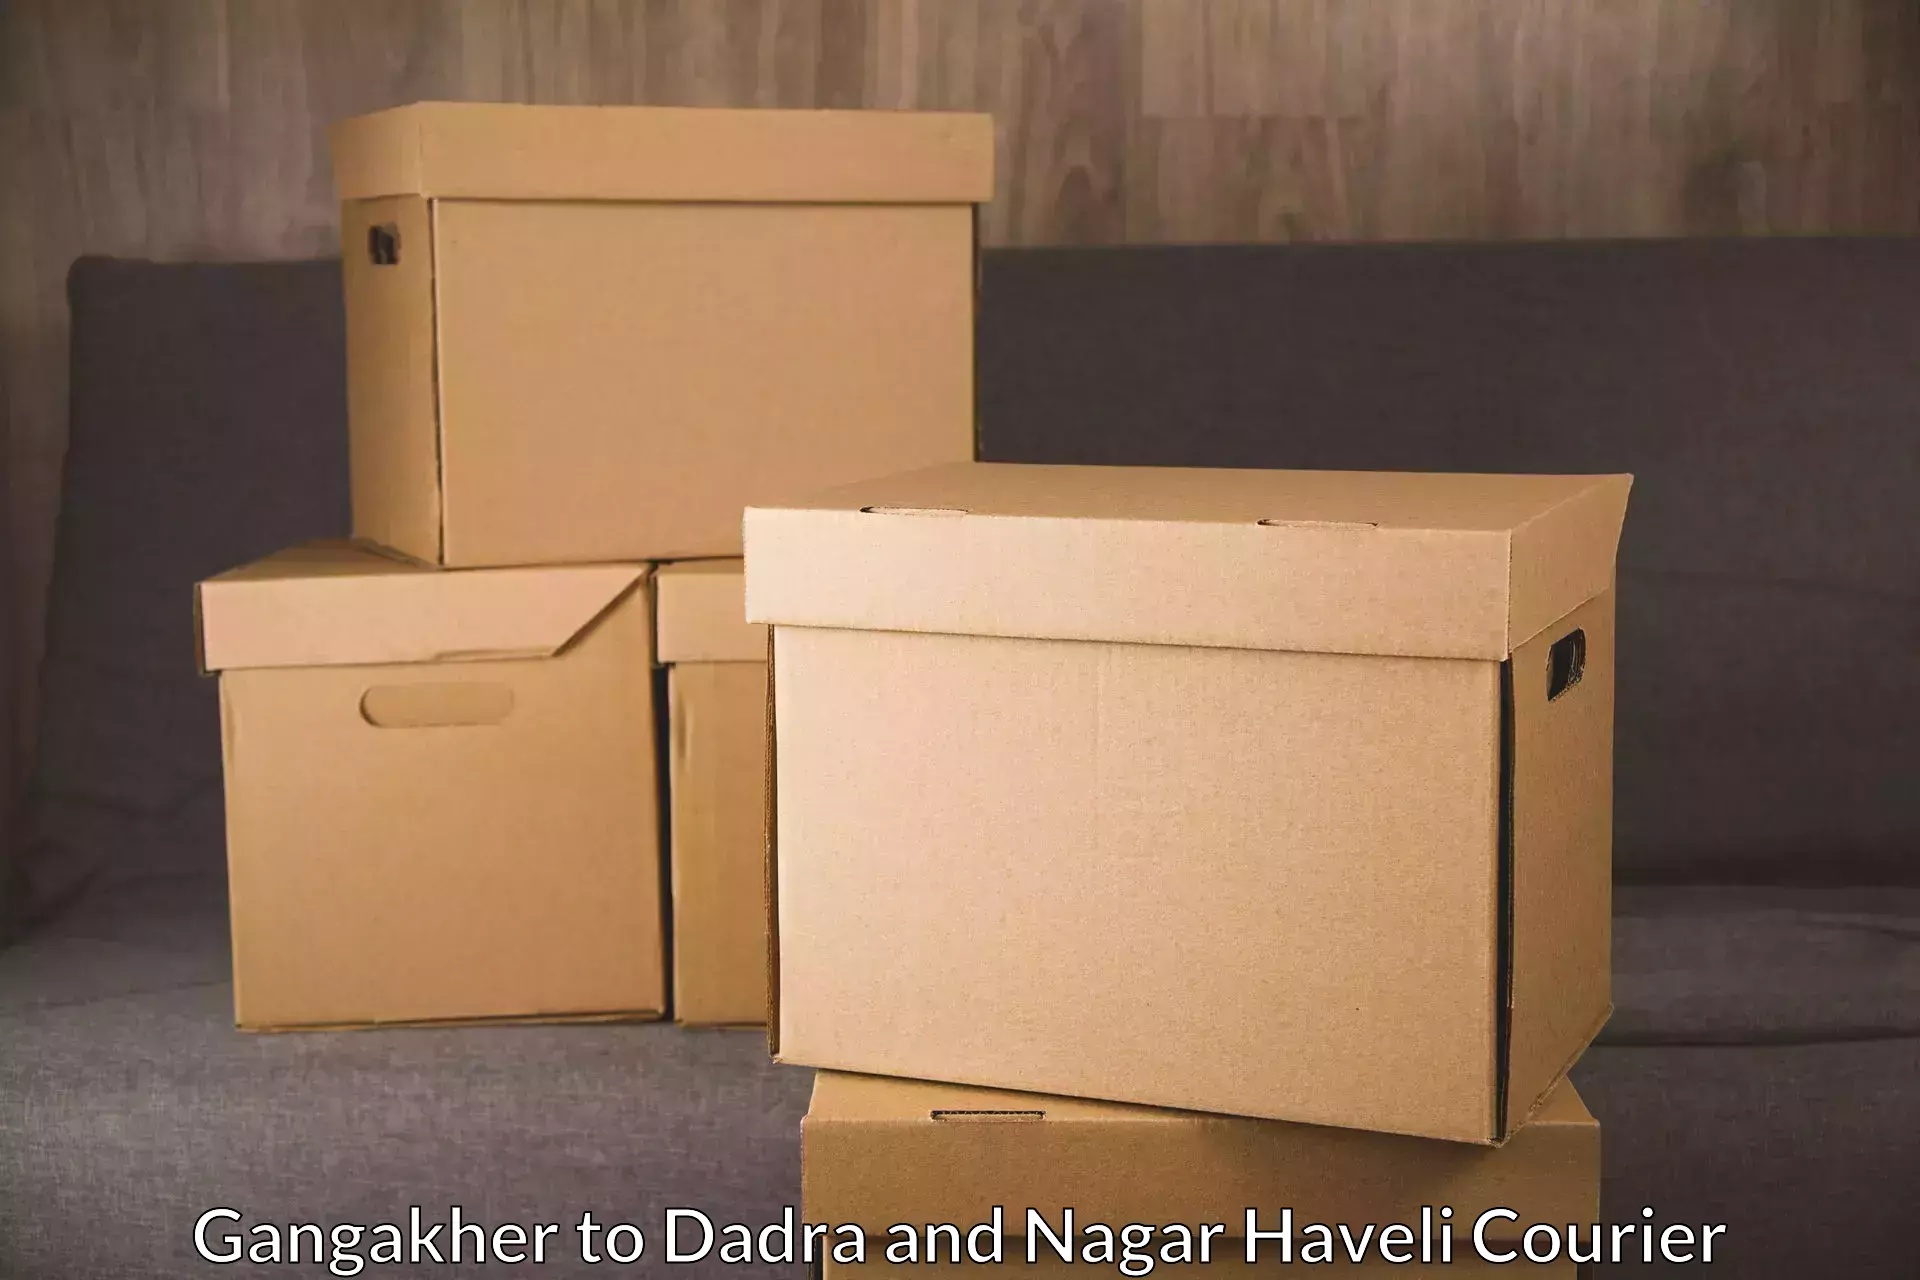 Package delivery network Gangakher to Dadra and Nagar Haveli